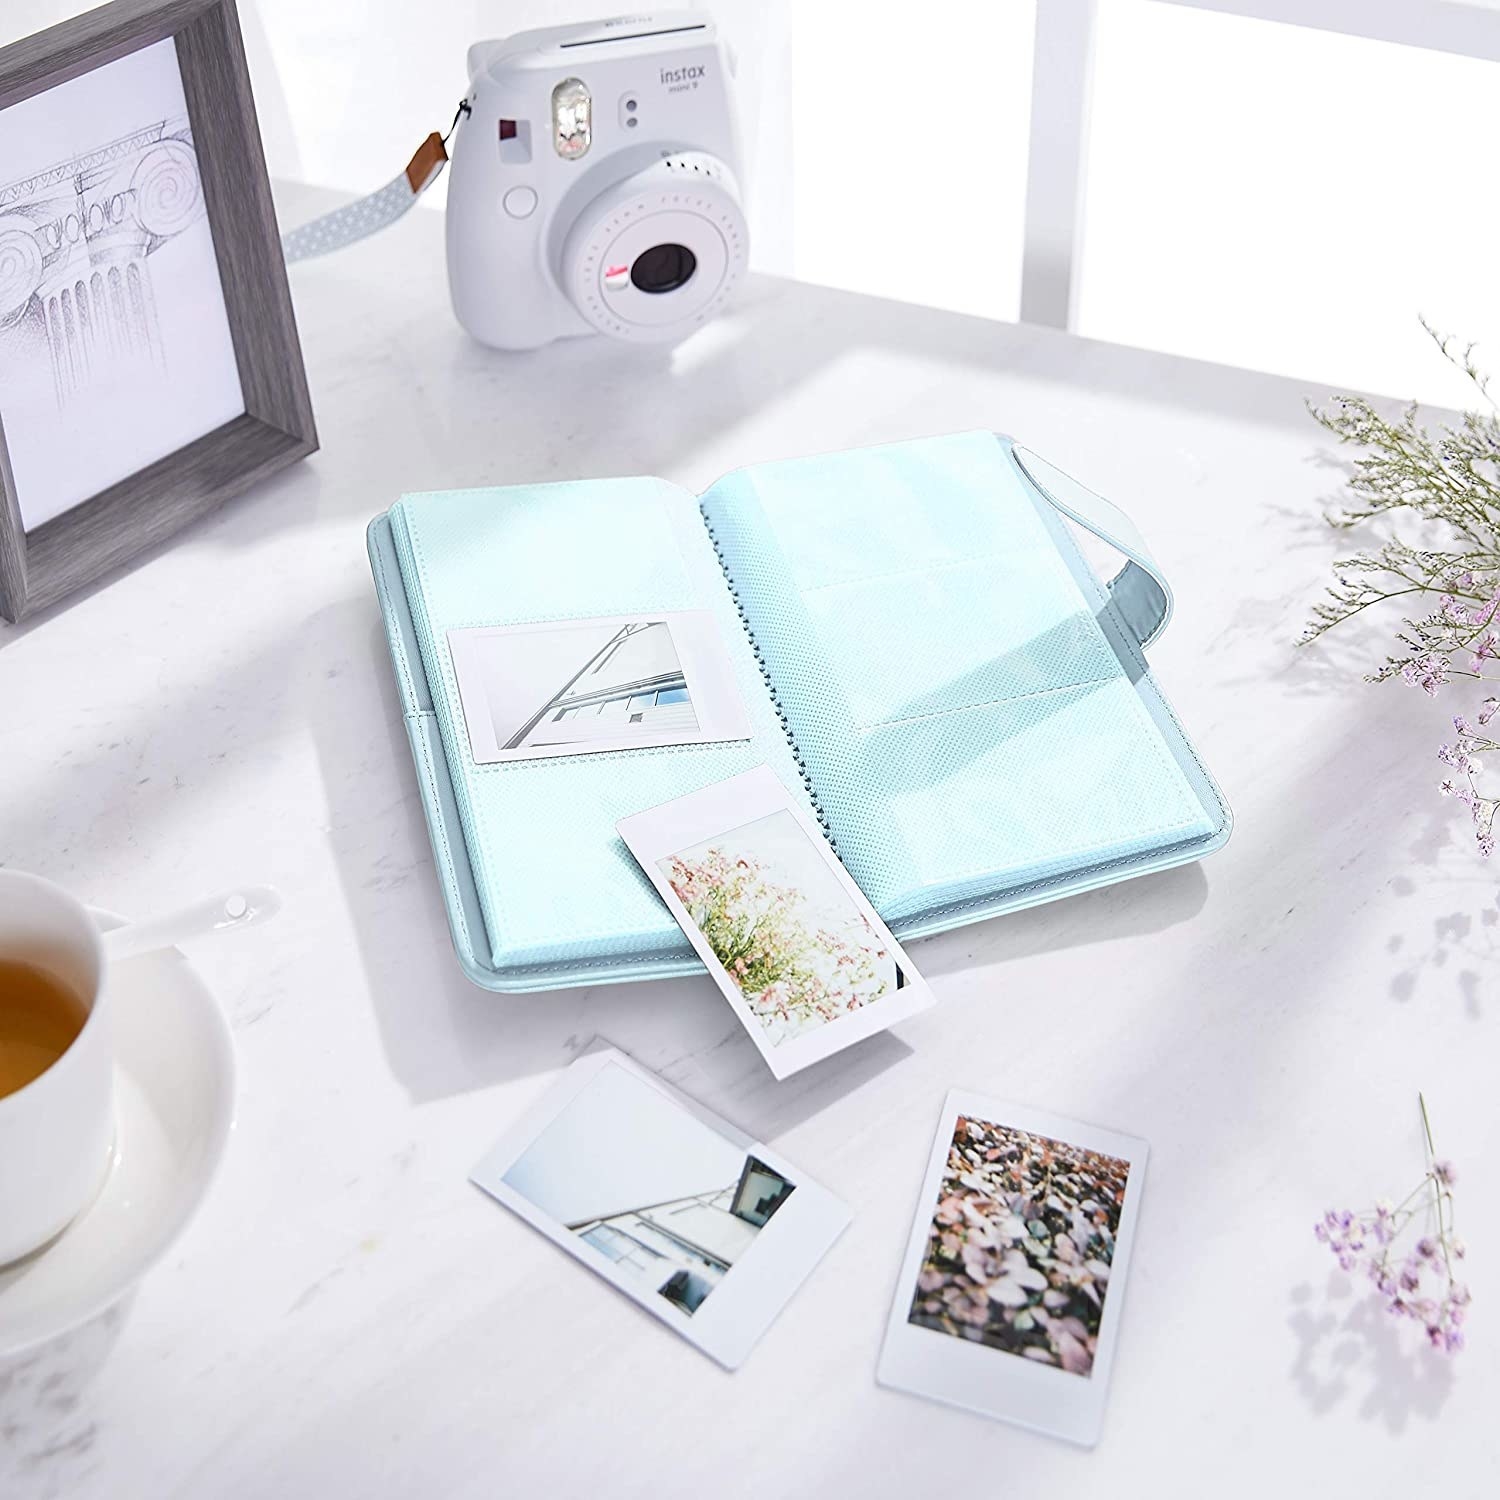 An album with instant photos on the table beside it